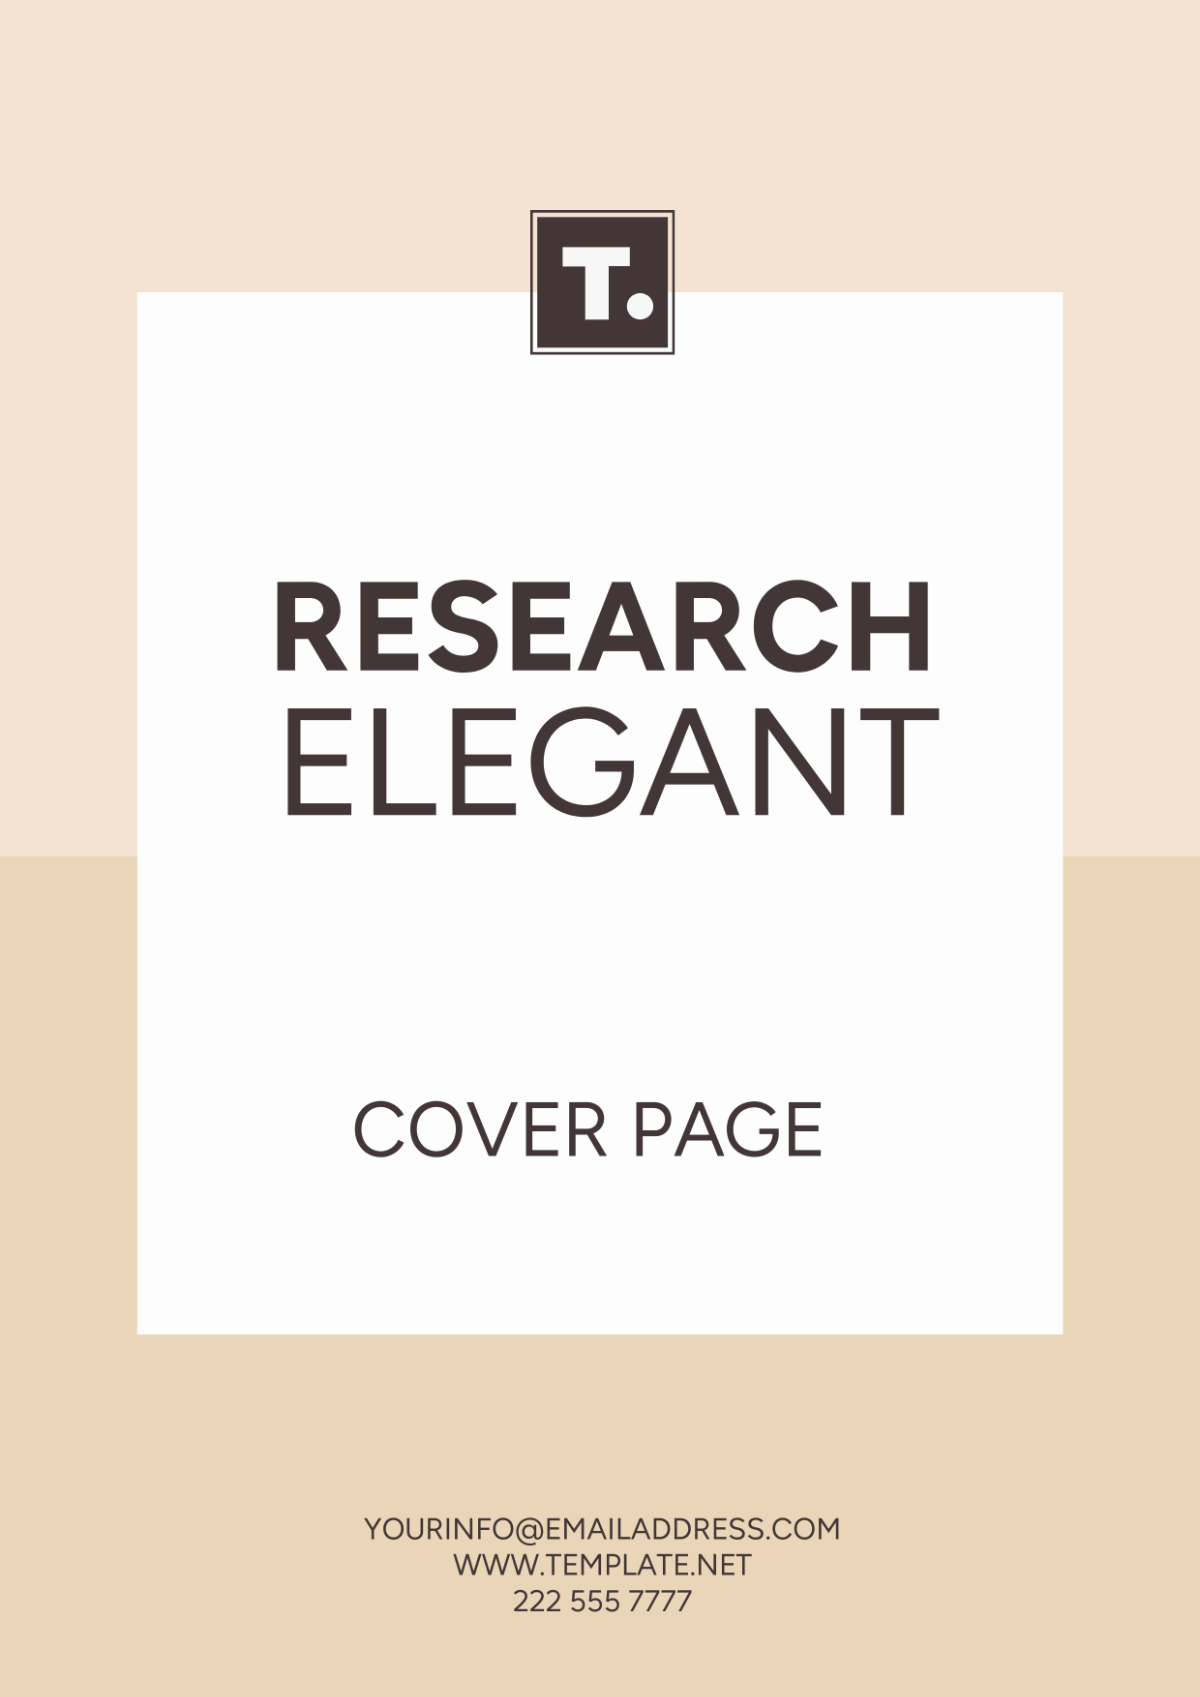 Research Elegant Cover Page